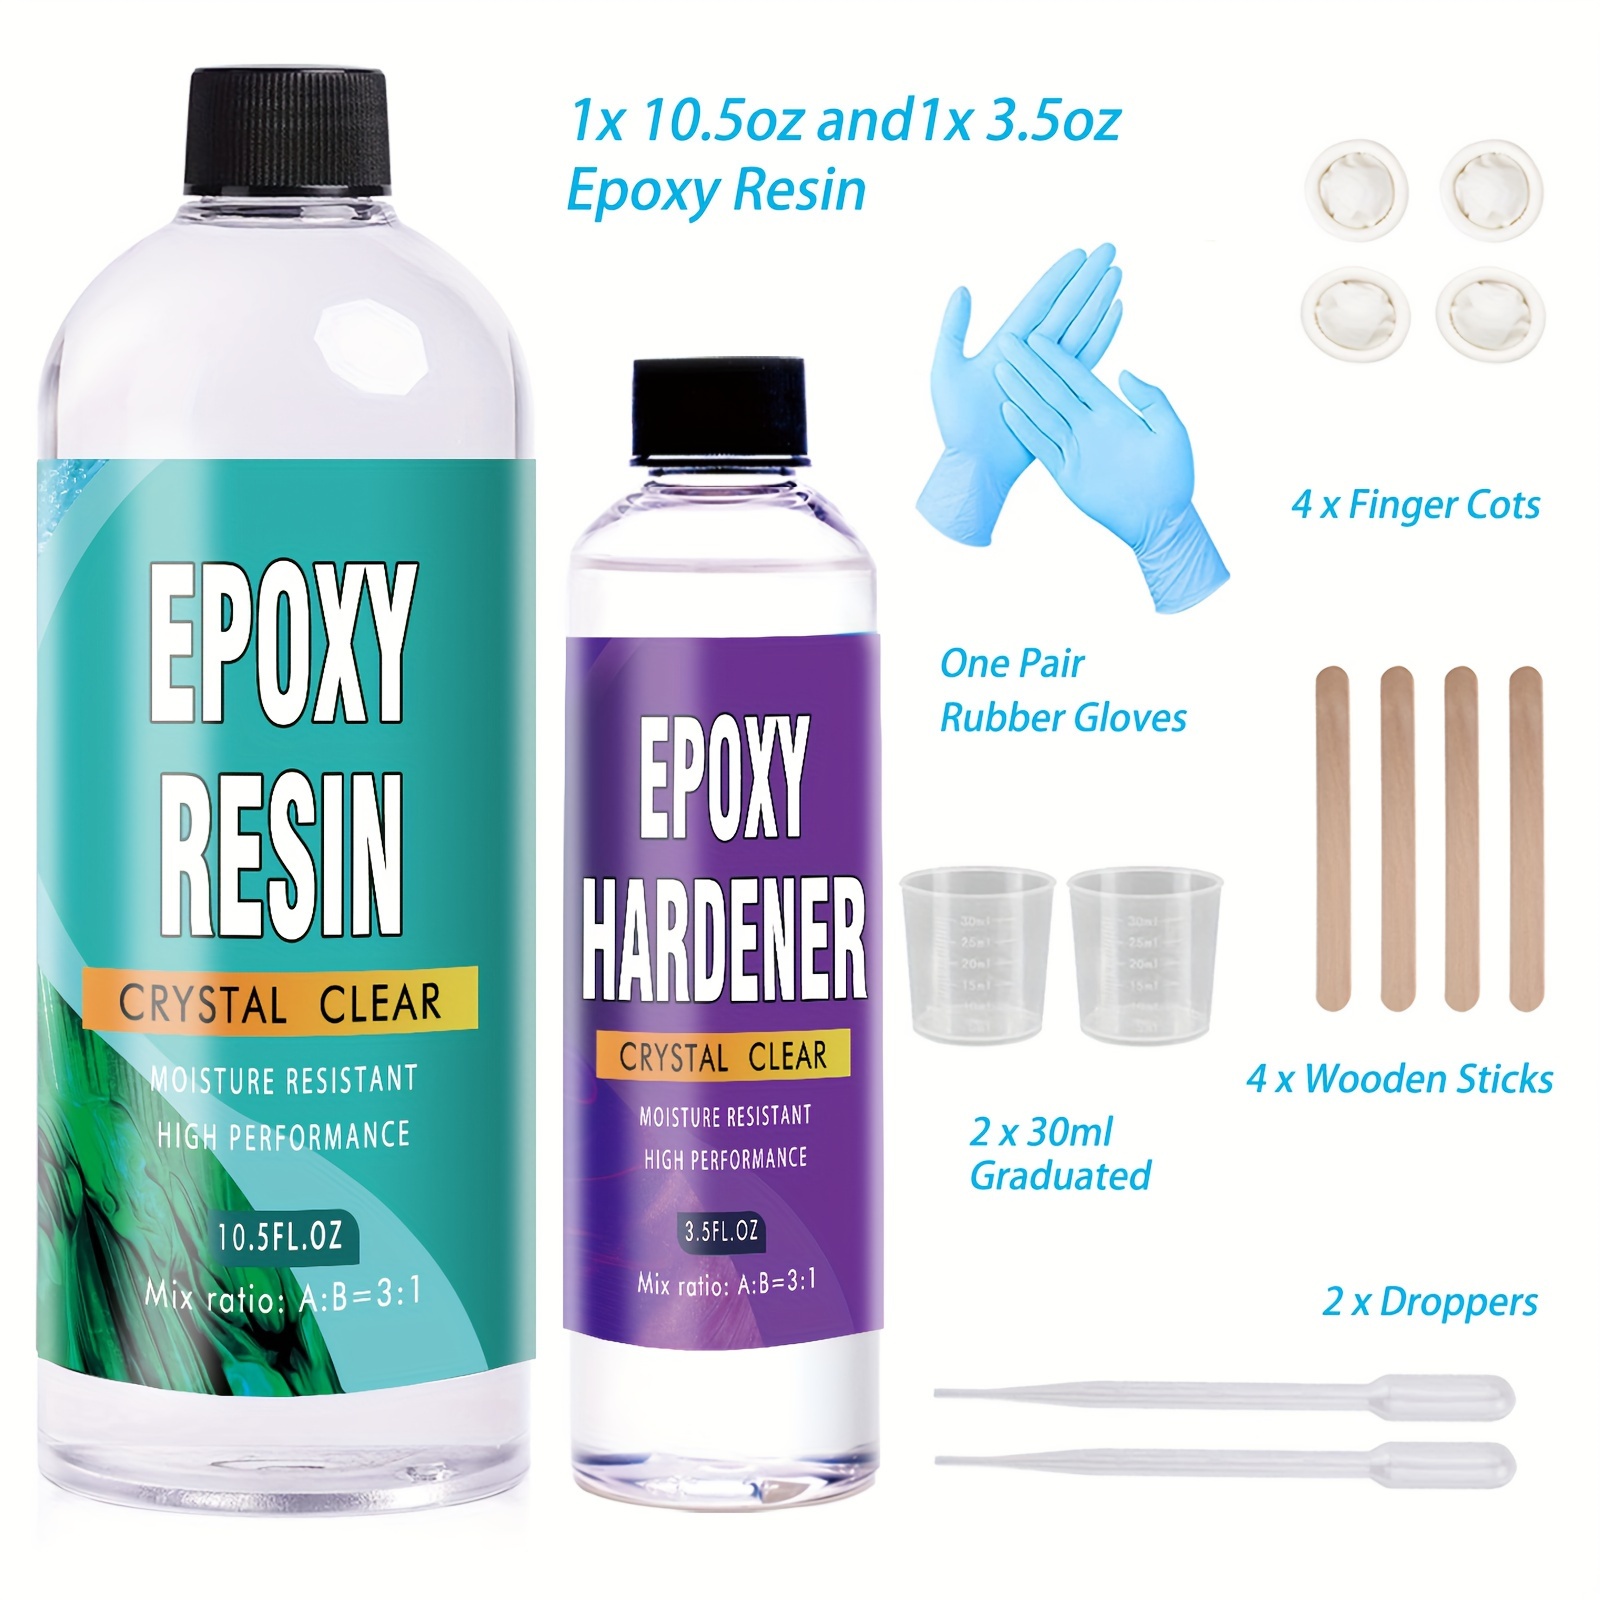 Clear Art Resin Epoxy Table Molds Epoxy Resin For Jewelry Making